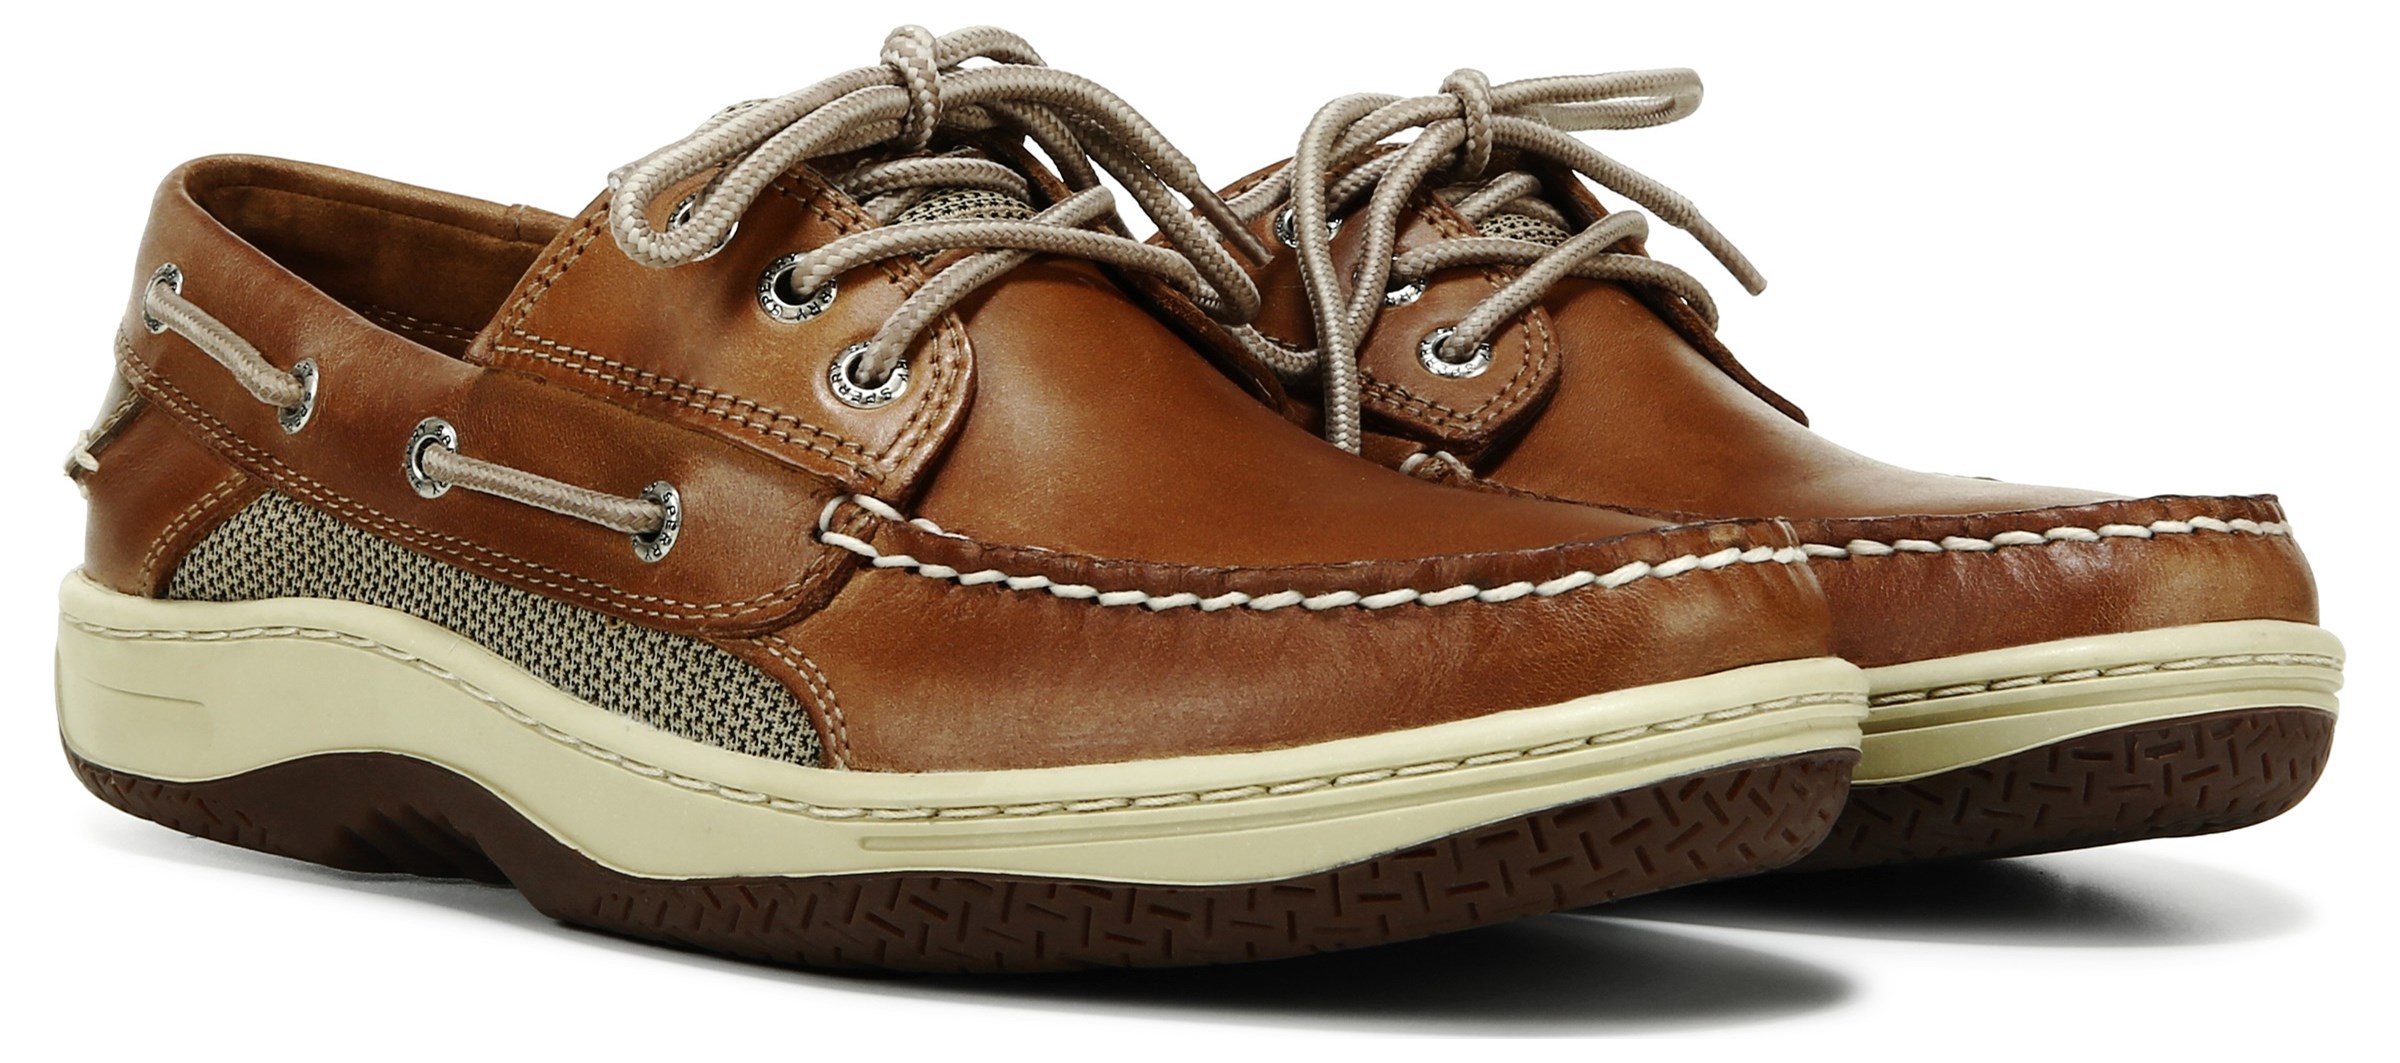 Sperry Top-Sider Billfish A/C Boat Shoe 